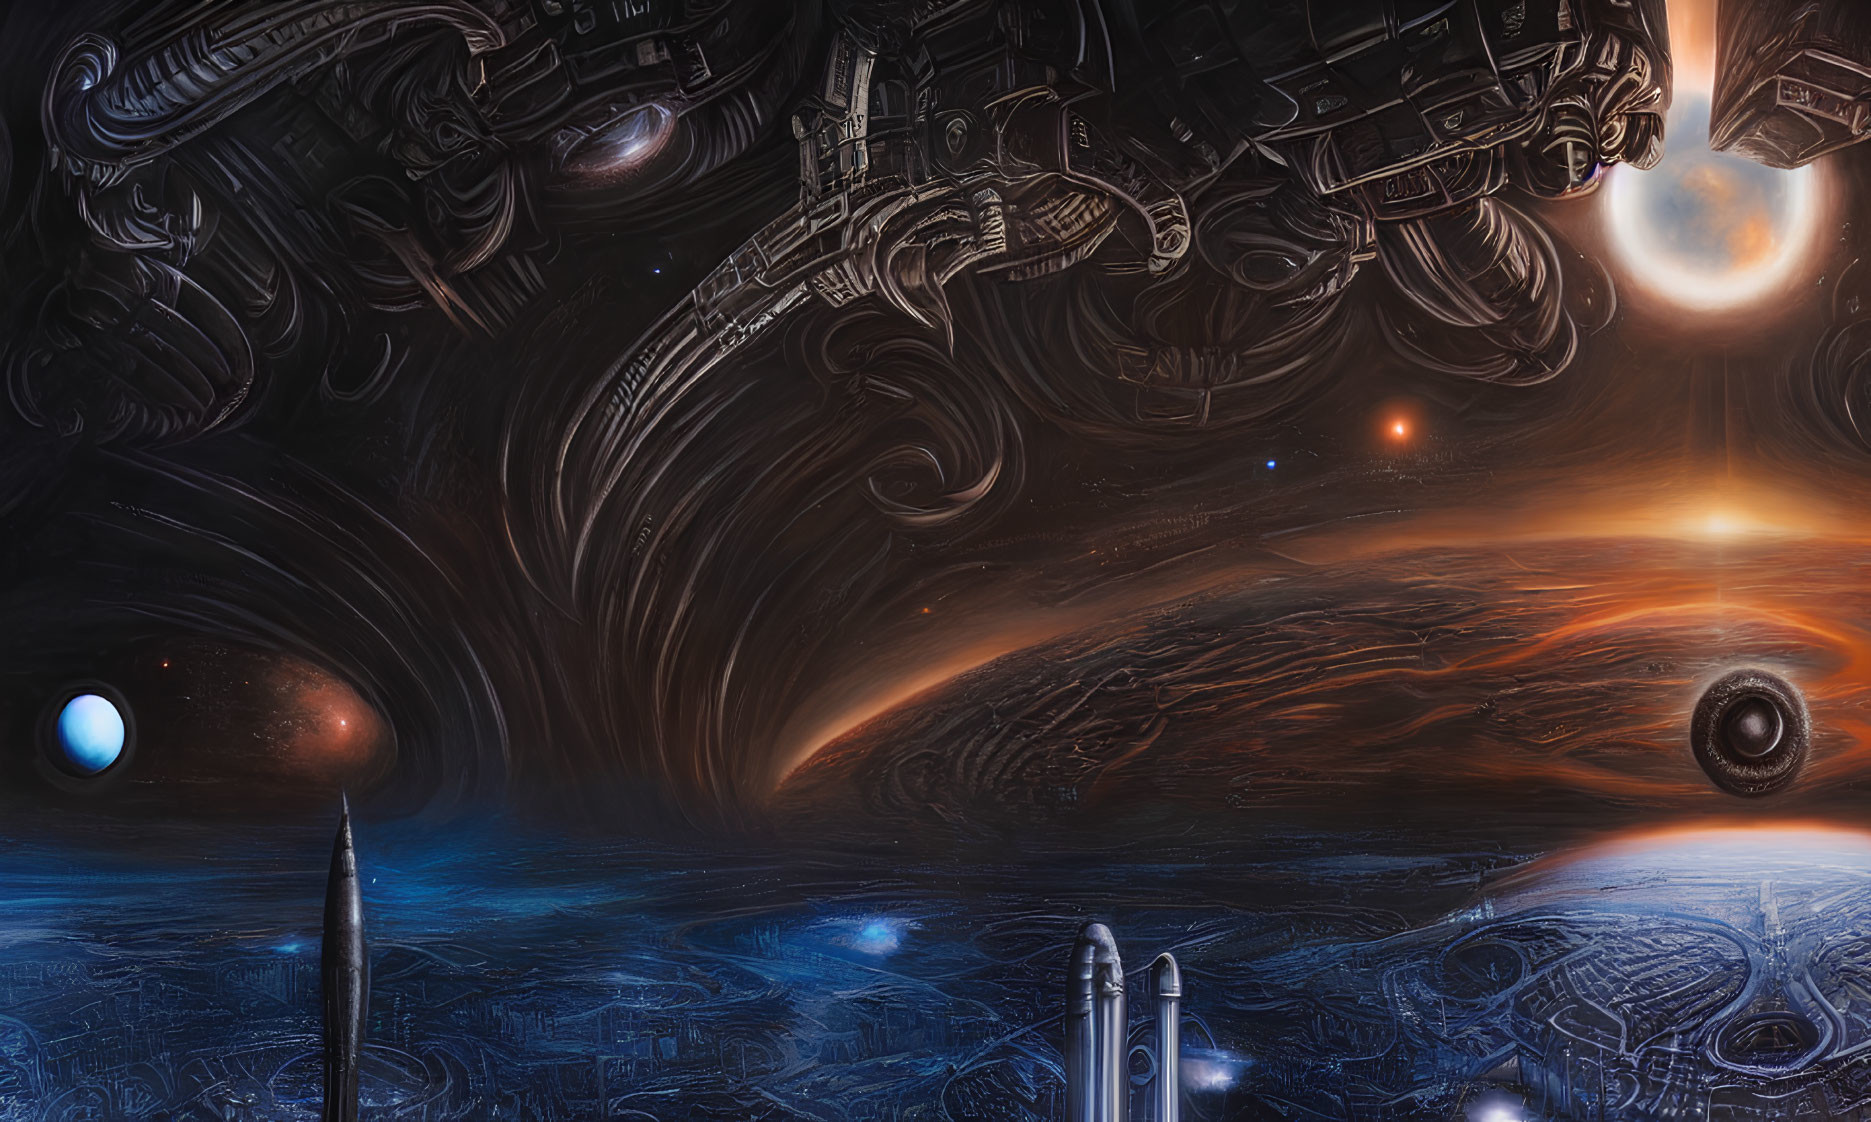 Futuristic sci-fi landscape with cosmic phenomena, planets, star, and structures